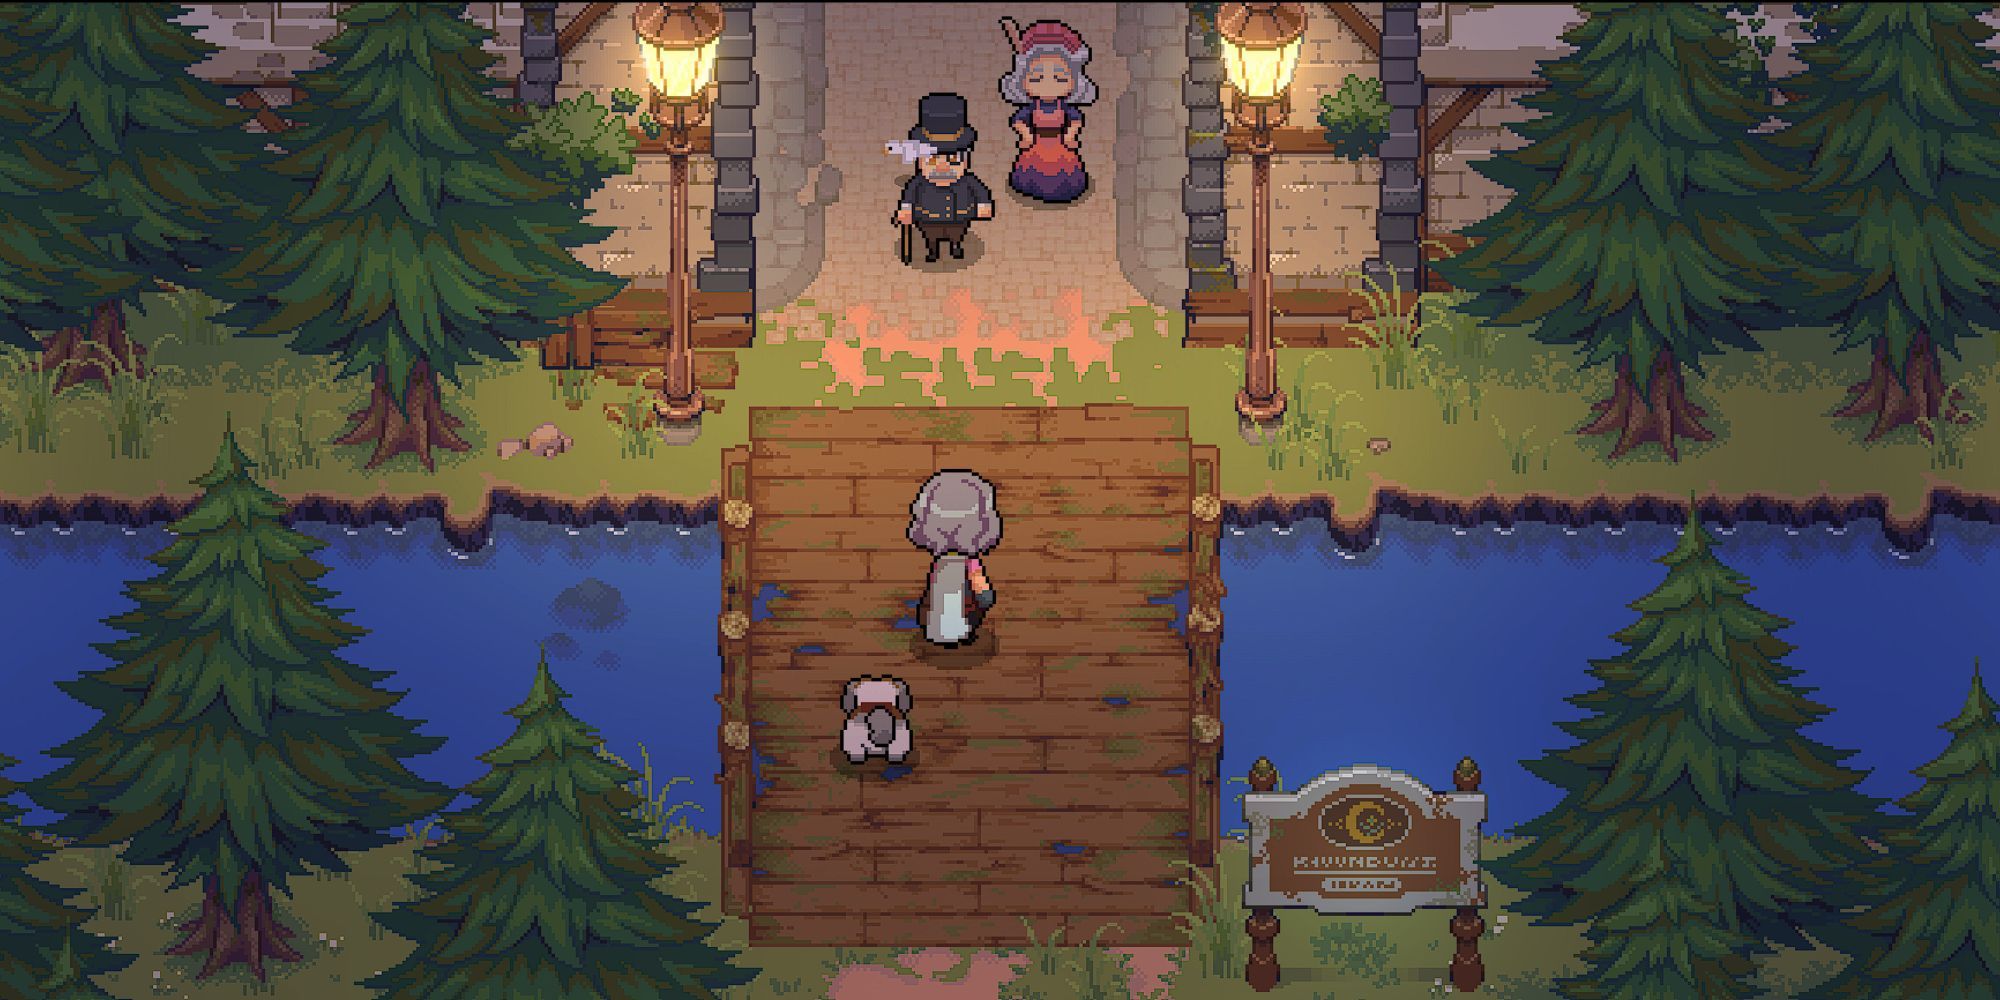 the apothecary and her dog cross a wooden bridge as the mayor and his wife greet them at the town's entrance